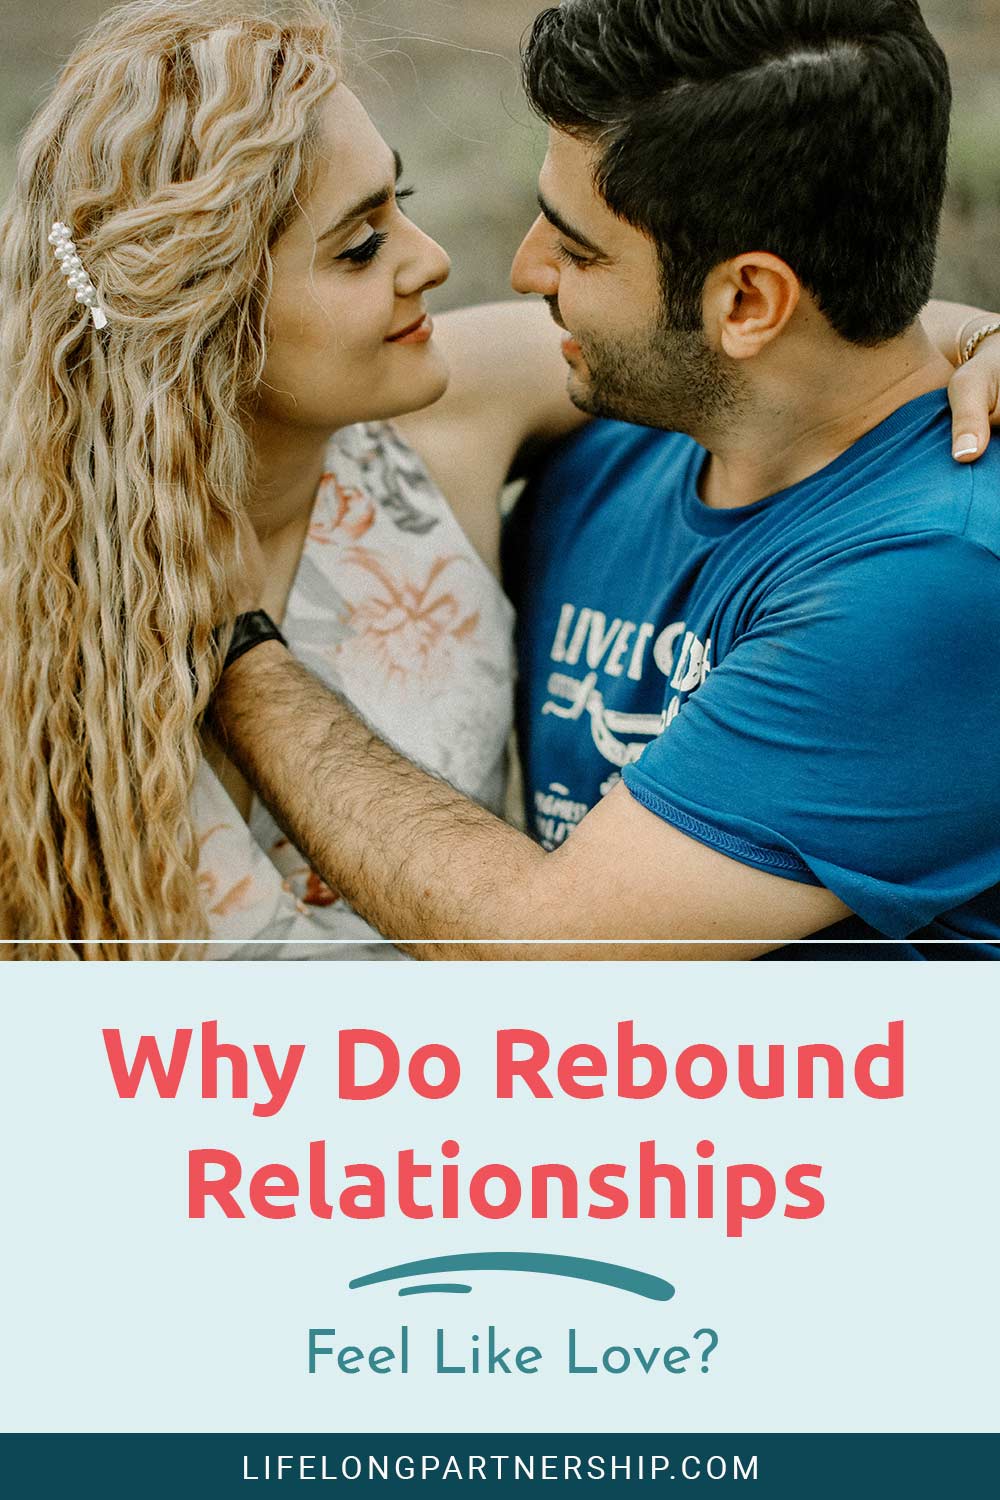 Man and woman holding each other and smiling - Why Do Rebound Relationships Feel Like Love?